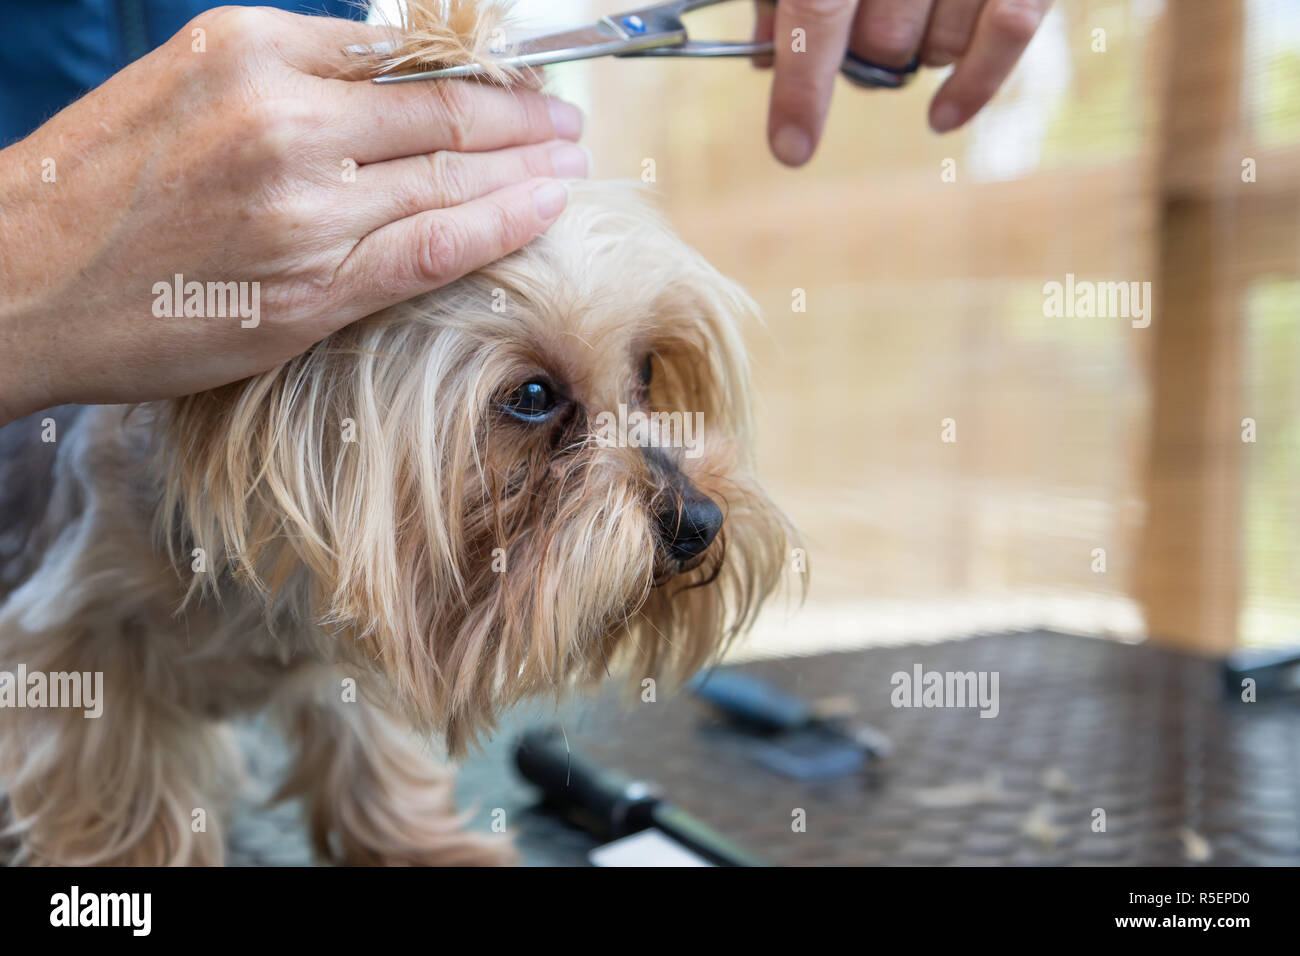 Grooming Yorkshire terrier side view Stock Photo